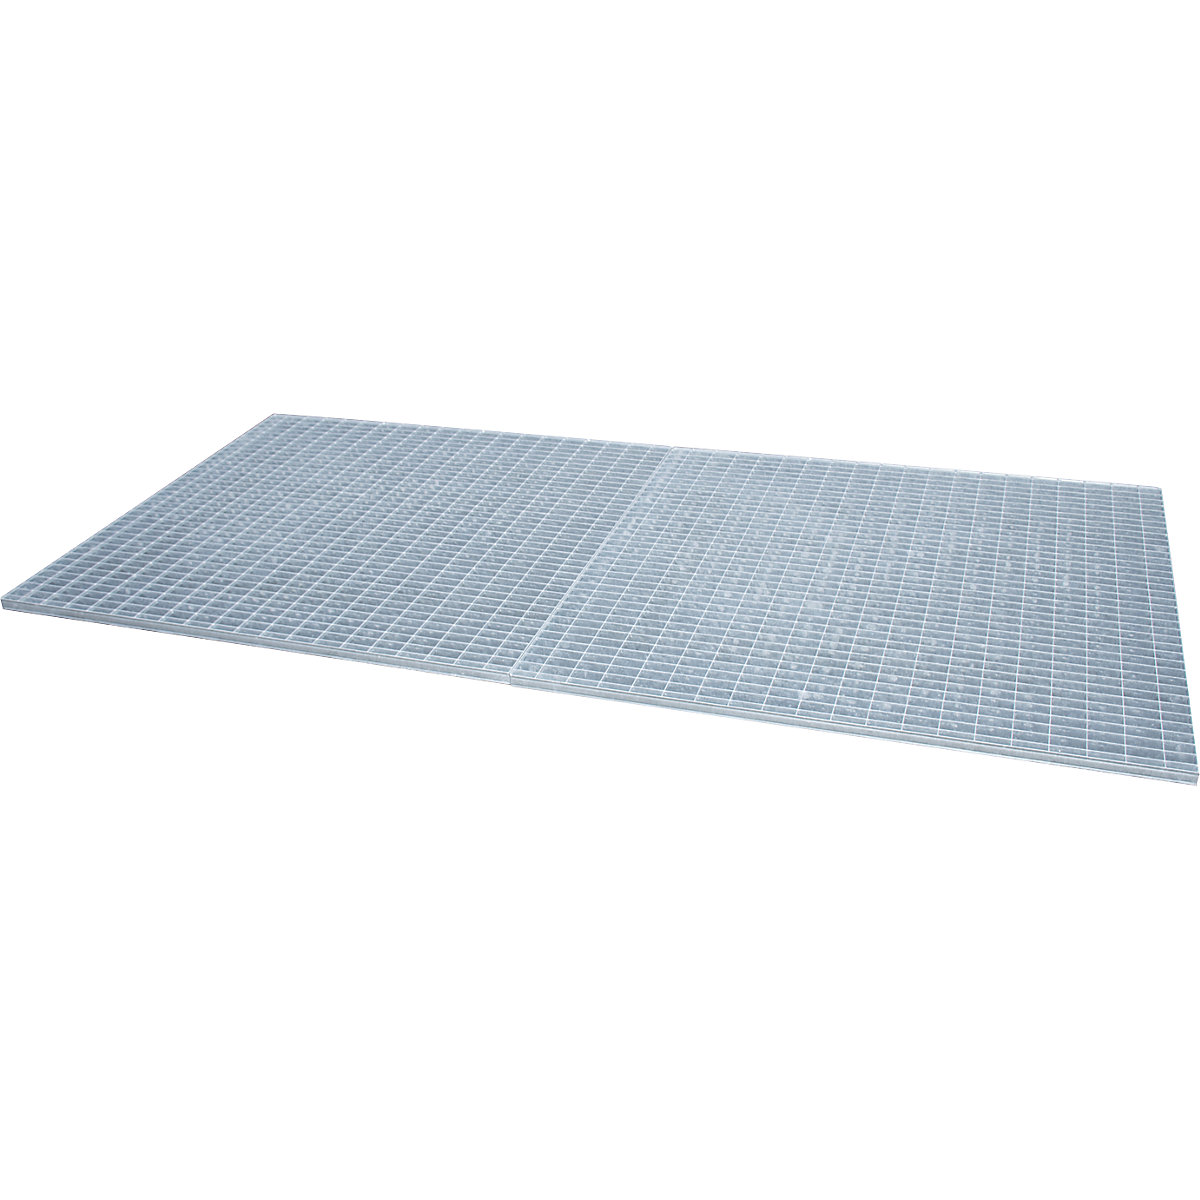 Grate – eurokraft pro, for sump trays for tank containers, zinc plated, LxWxH 2650 x 1300 x 435 mm-2